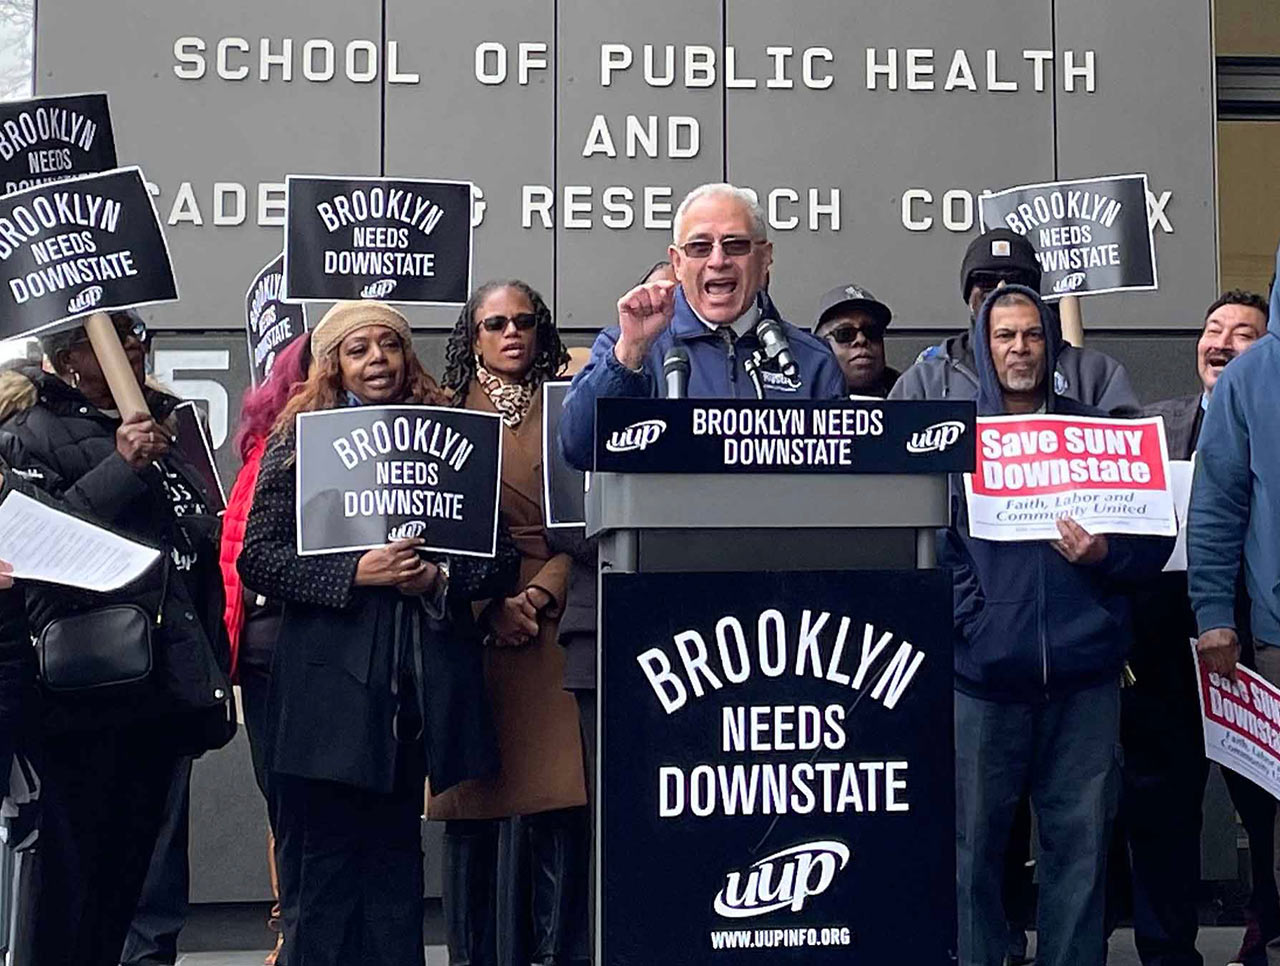 NYSUT President Andy Pallotta speaking in front of the School of Public Health during a Brooklyn Needs Downstate event